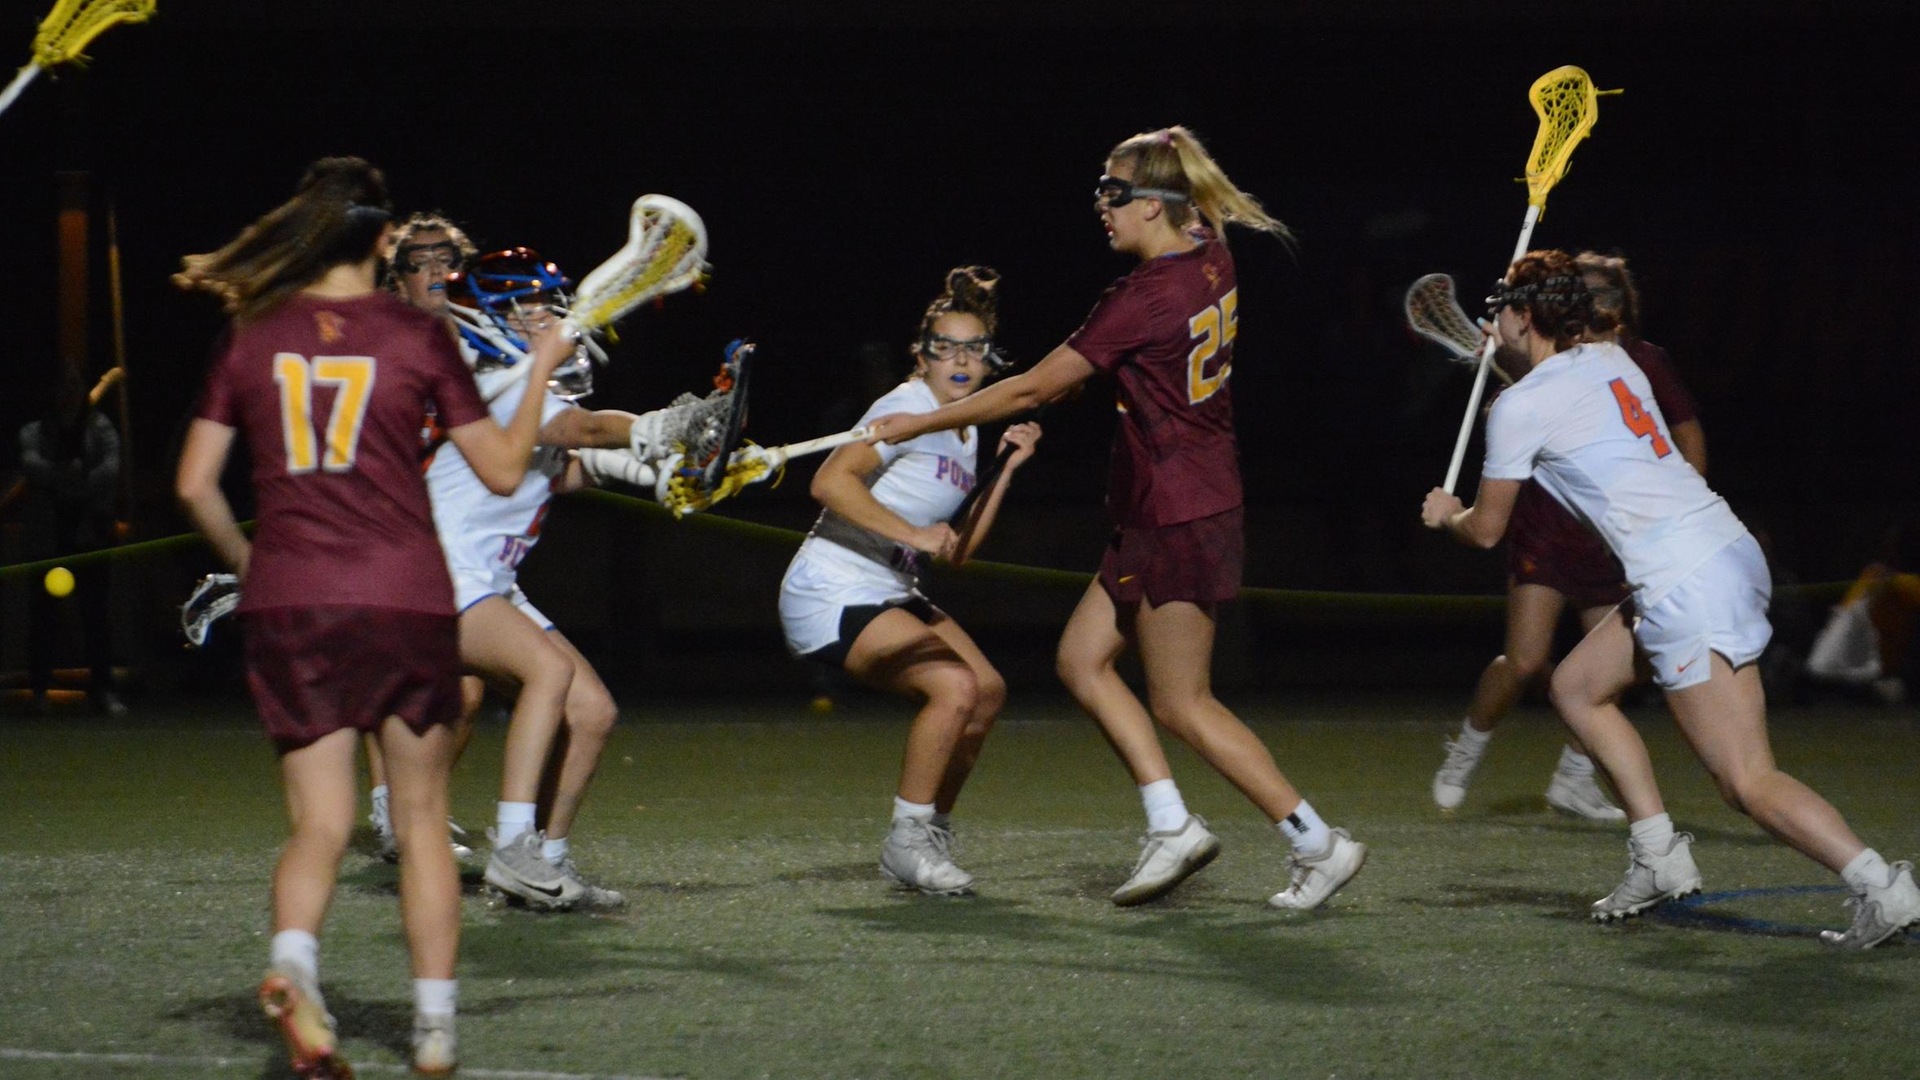 Bella Lynch scores one of her three goals for the Athenas